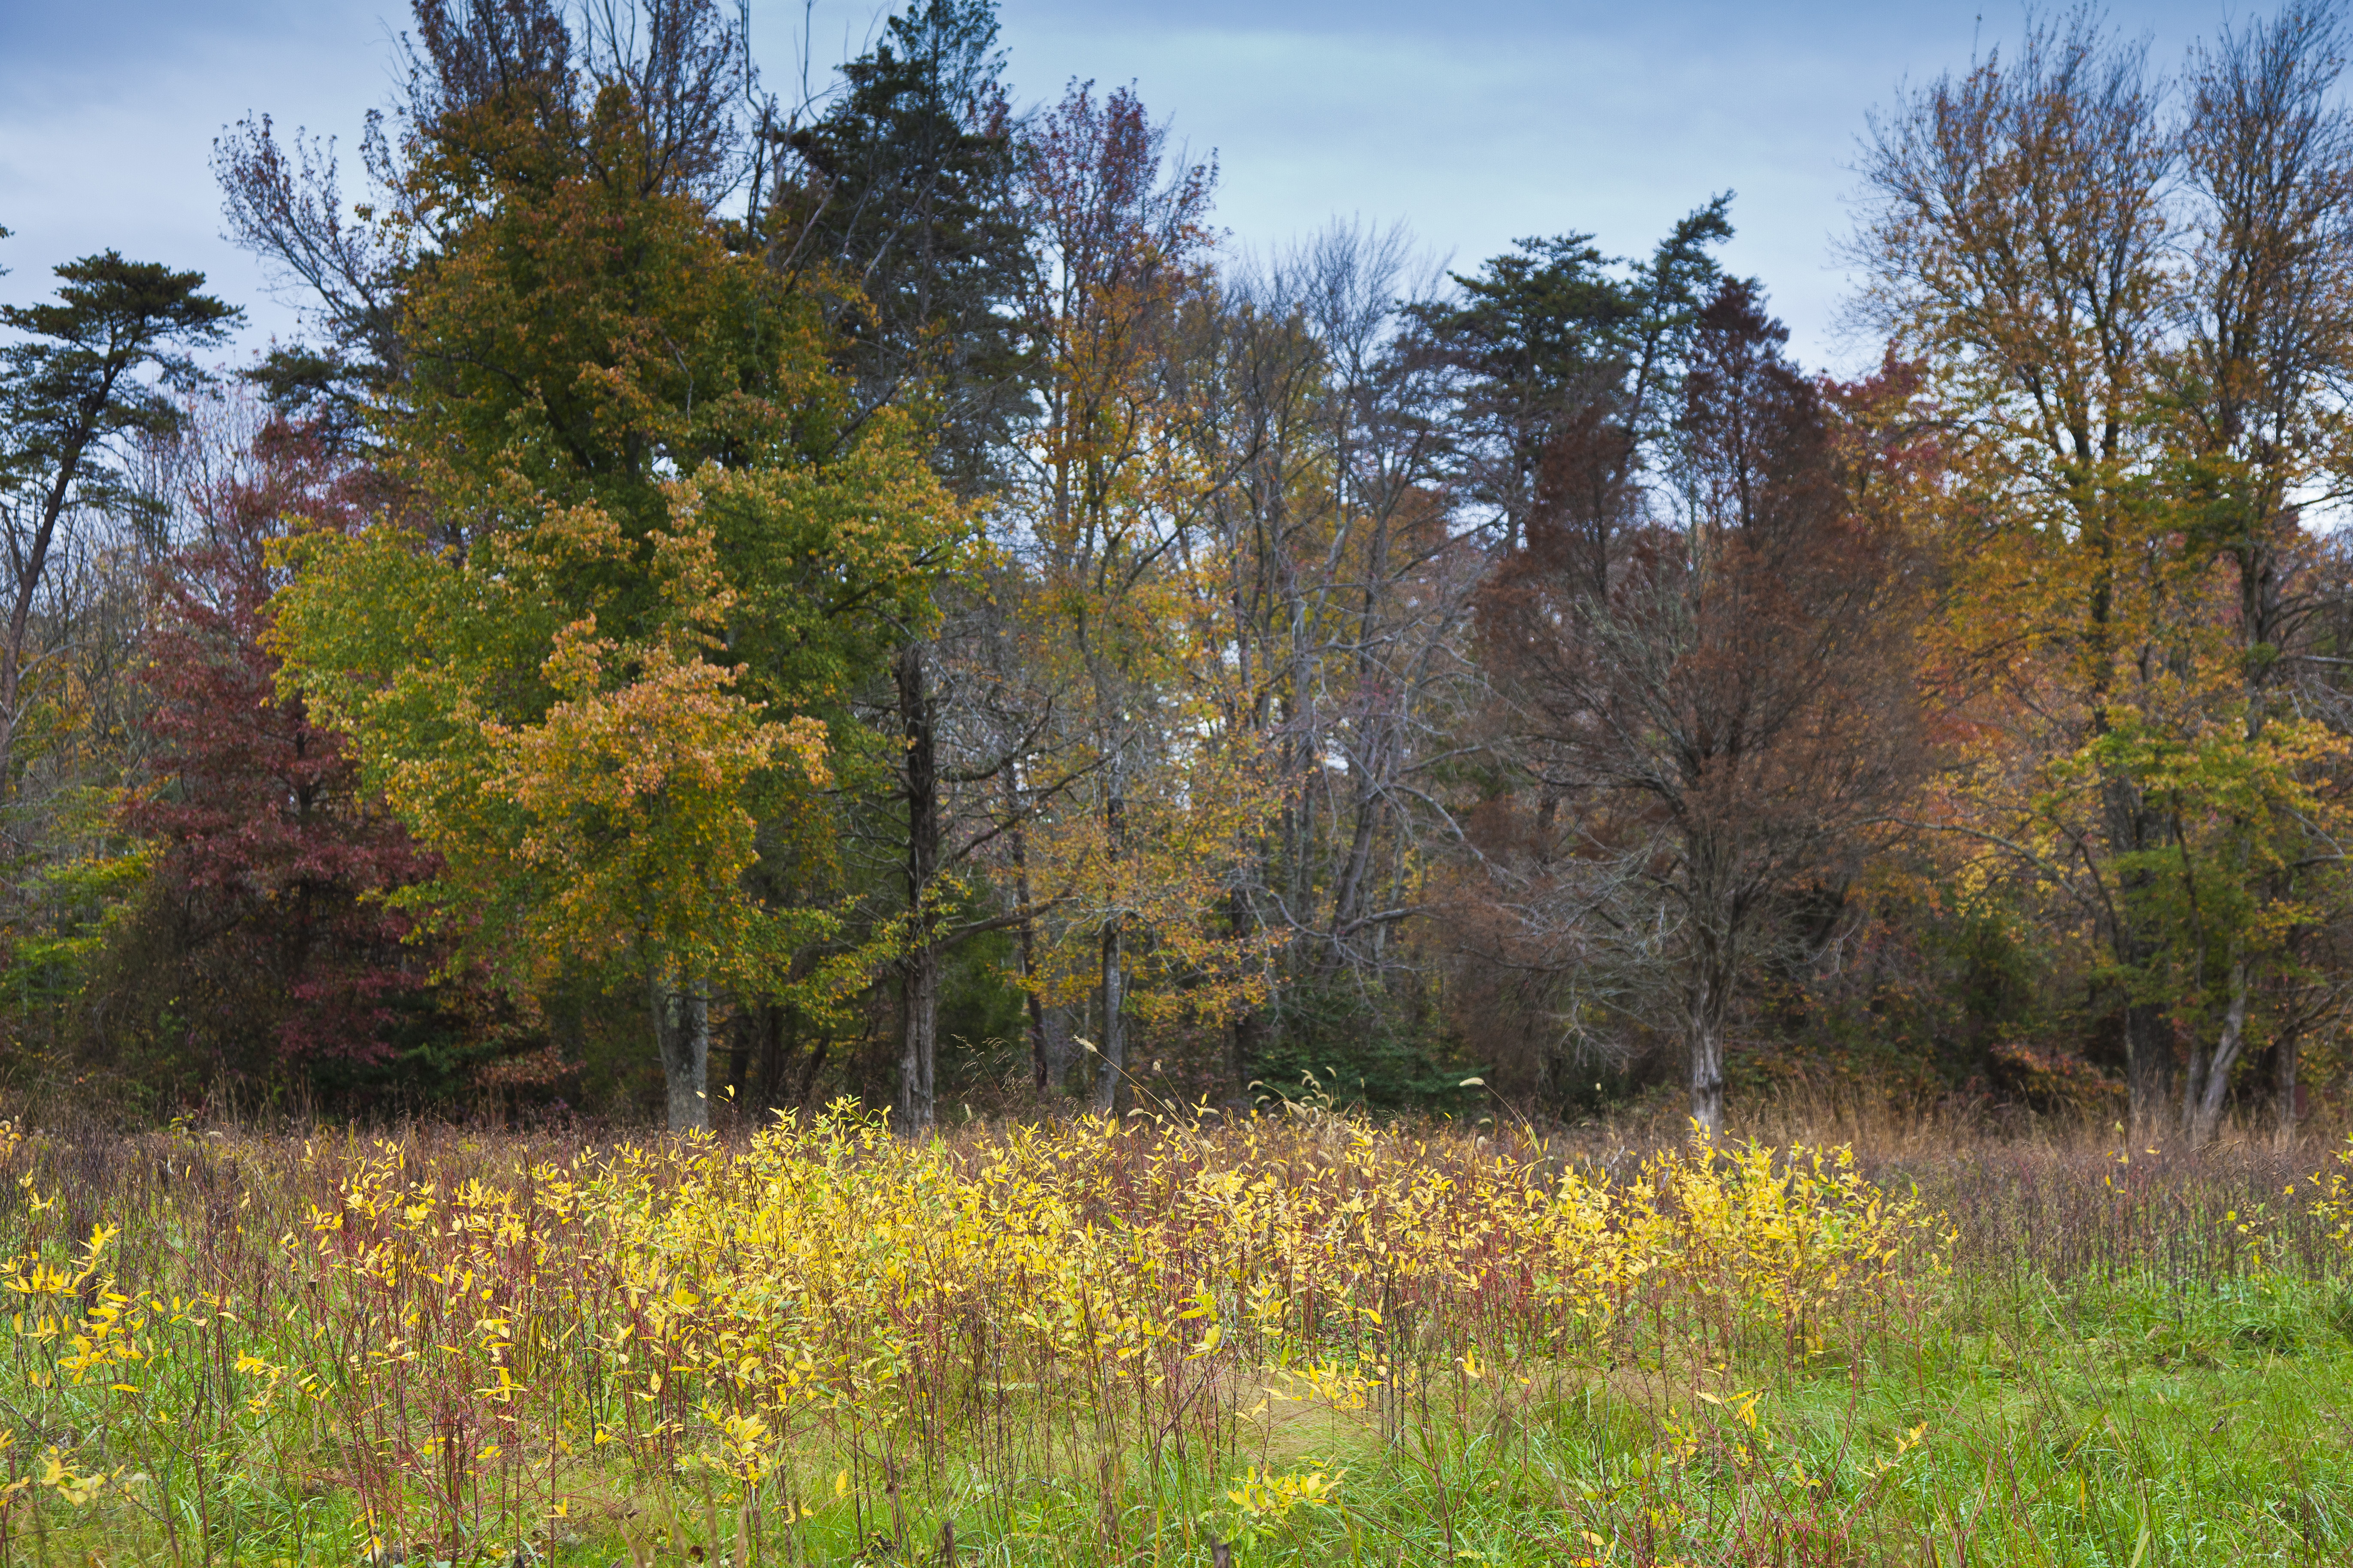 A field in fall, trees in the distance, with high grasses.